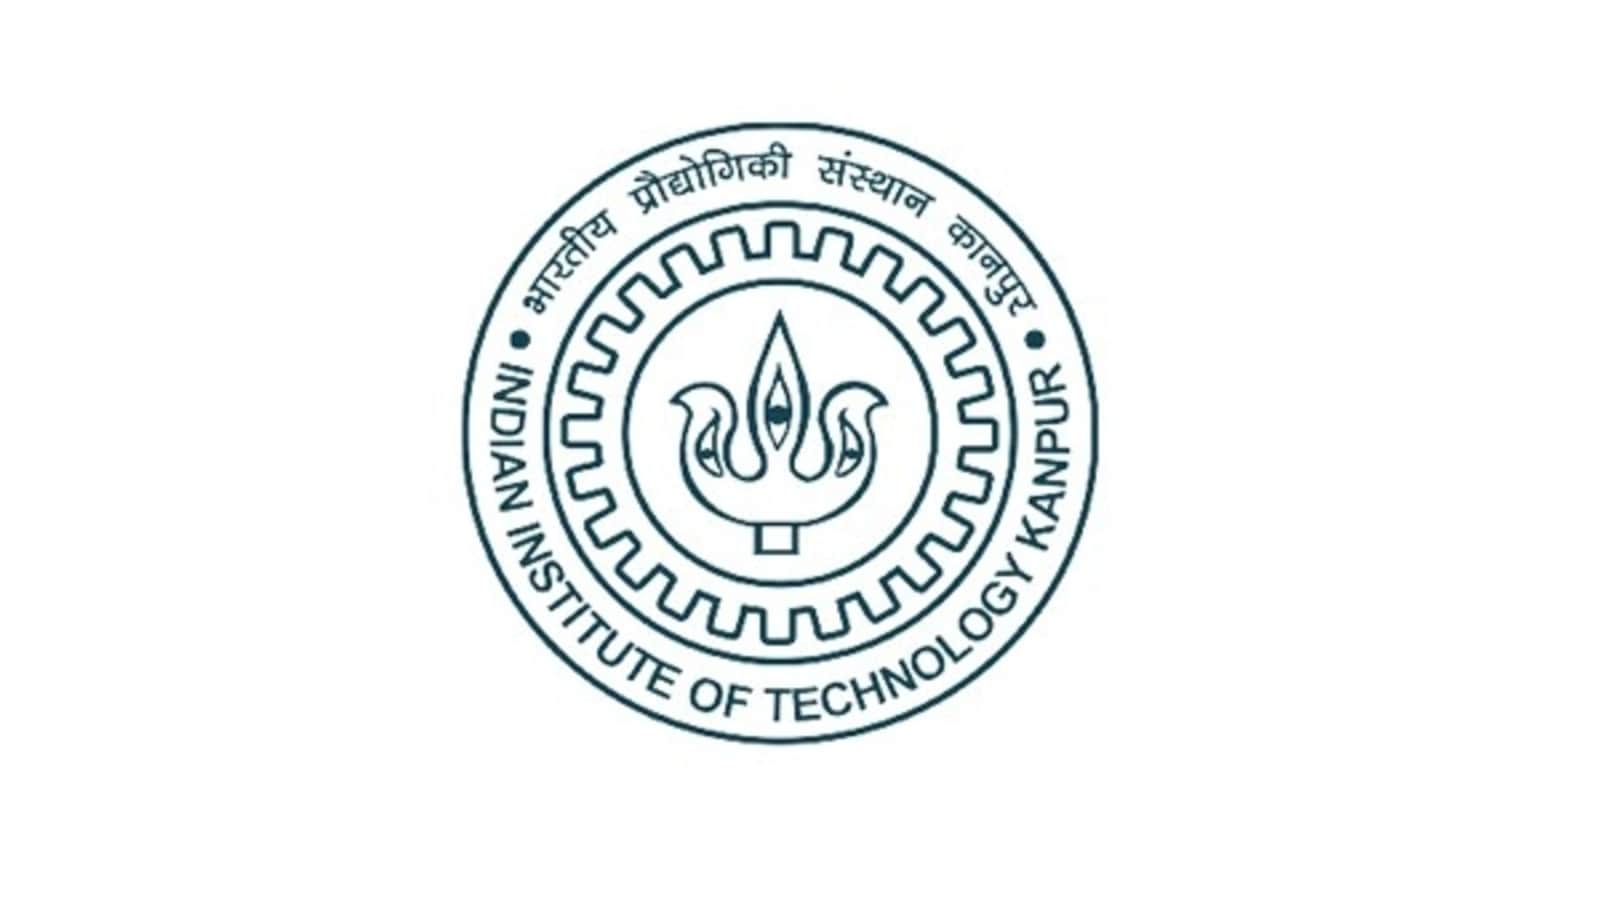 IIT Kanpur announces eMasters degrees for working professionals